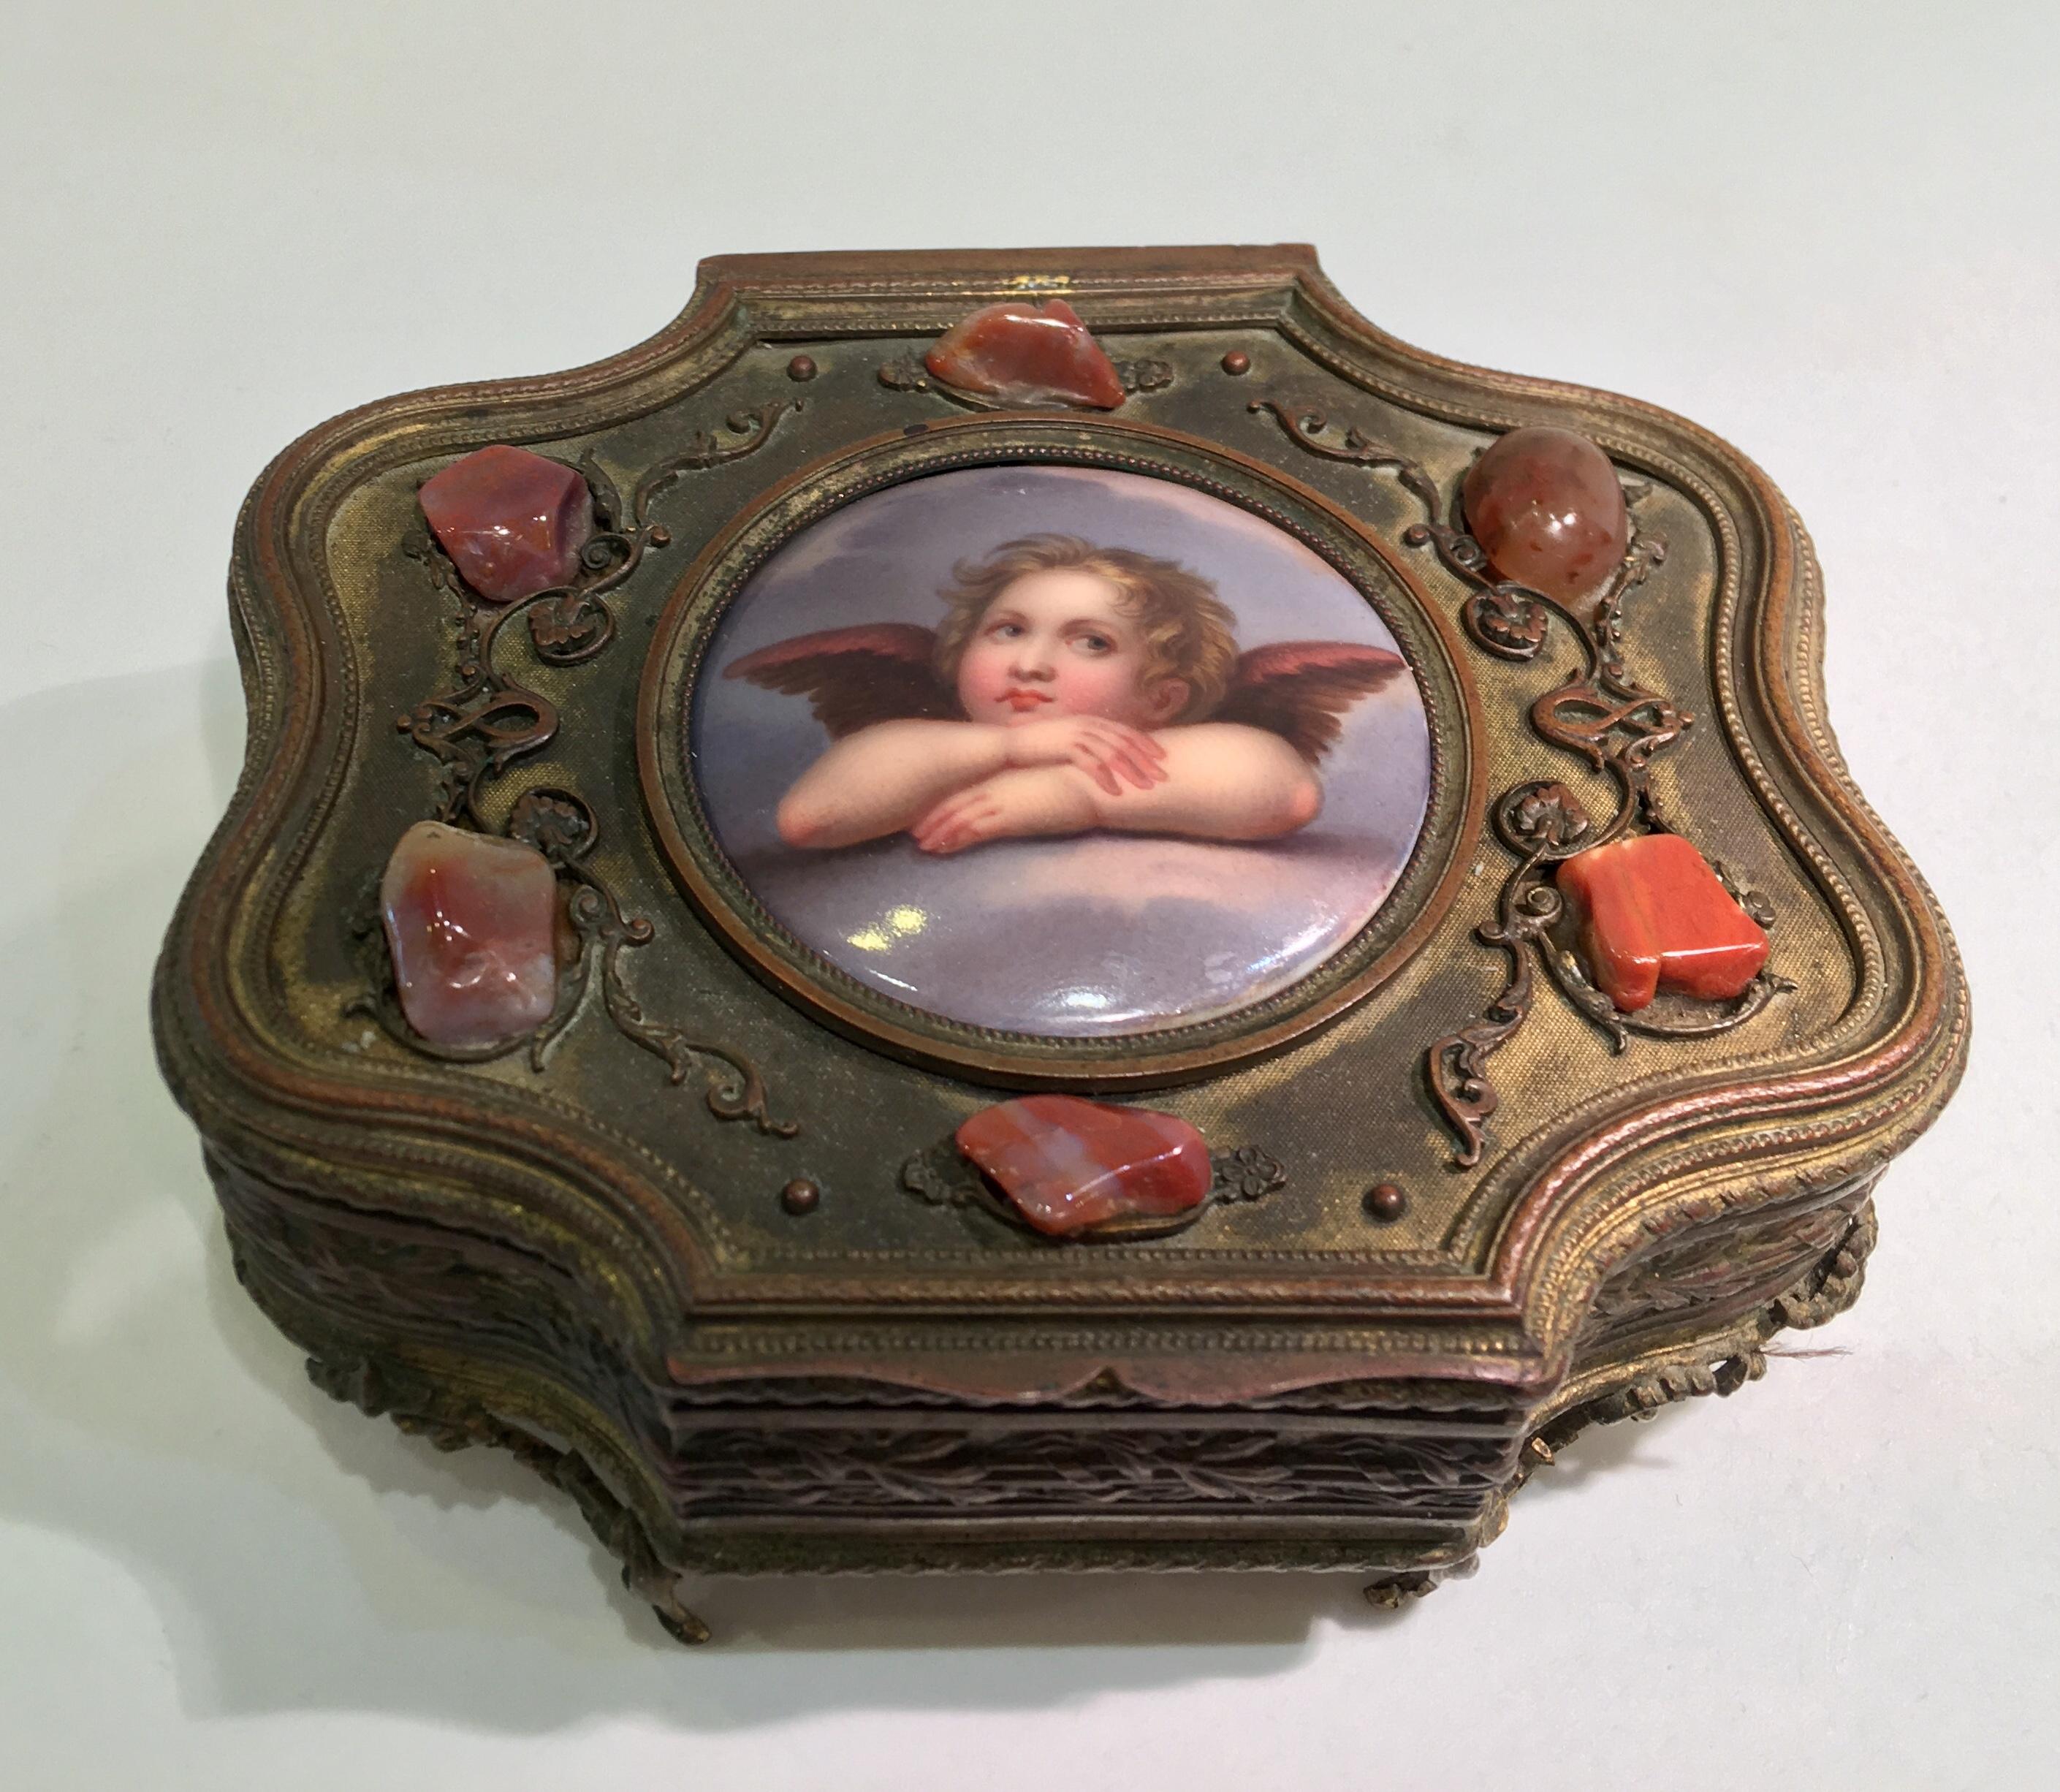 Beautiful antique, handcrafted French bronze and brass scalloped hinged jewelry or trinket or vanity box from the 19th century features a round porcelain plaque or disc, bezel set in the lid, exquisitely hand painted with a famous image depicting